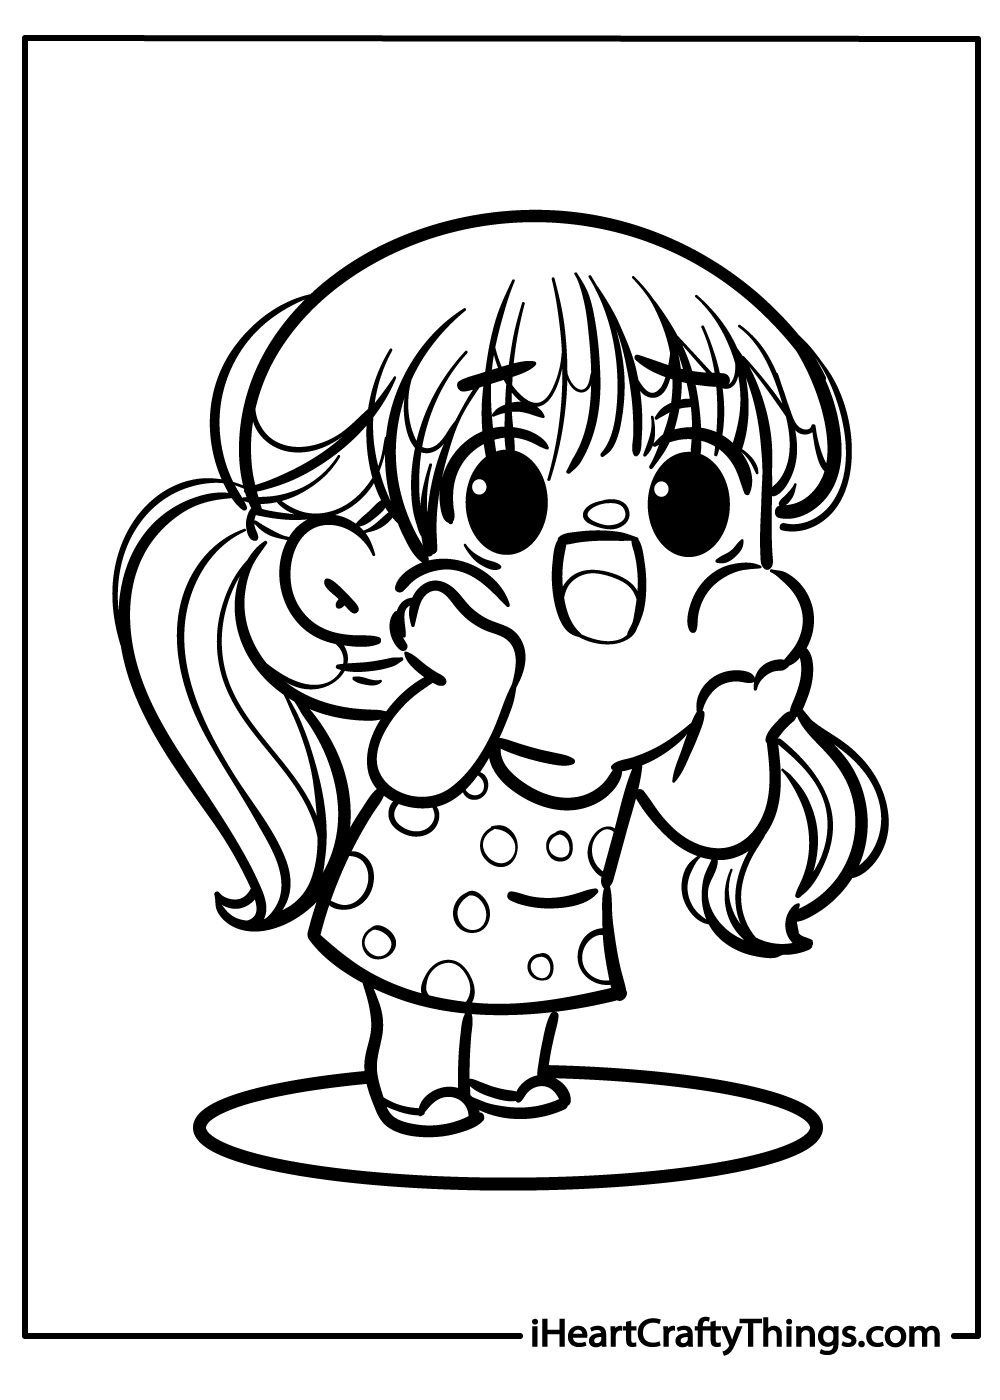 Chibi Yellow Rainbow Friends Coloring Pages - Free Printable Coloring Pages